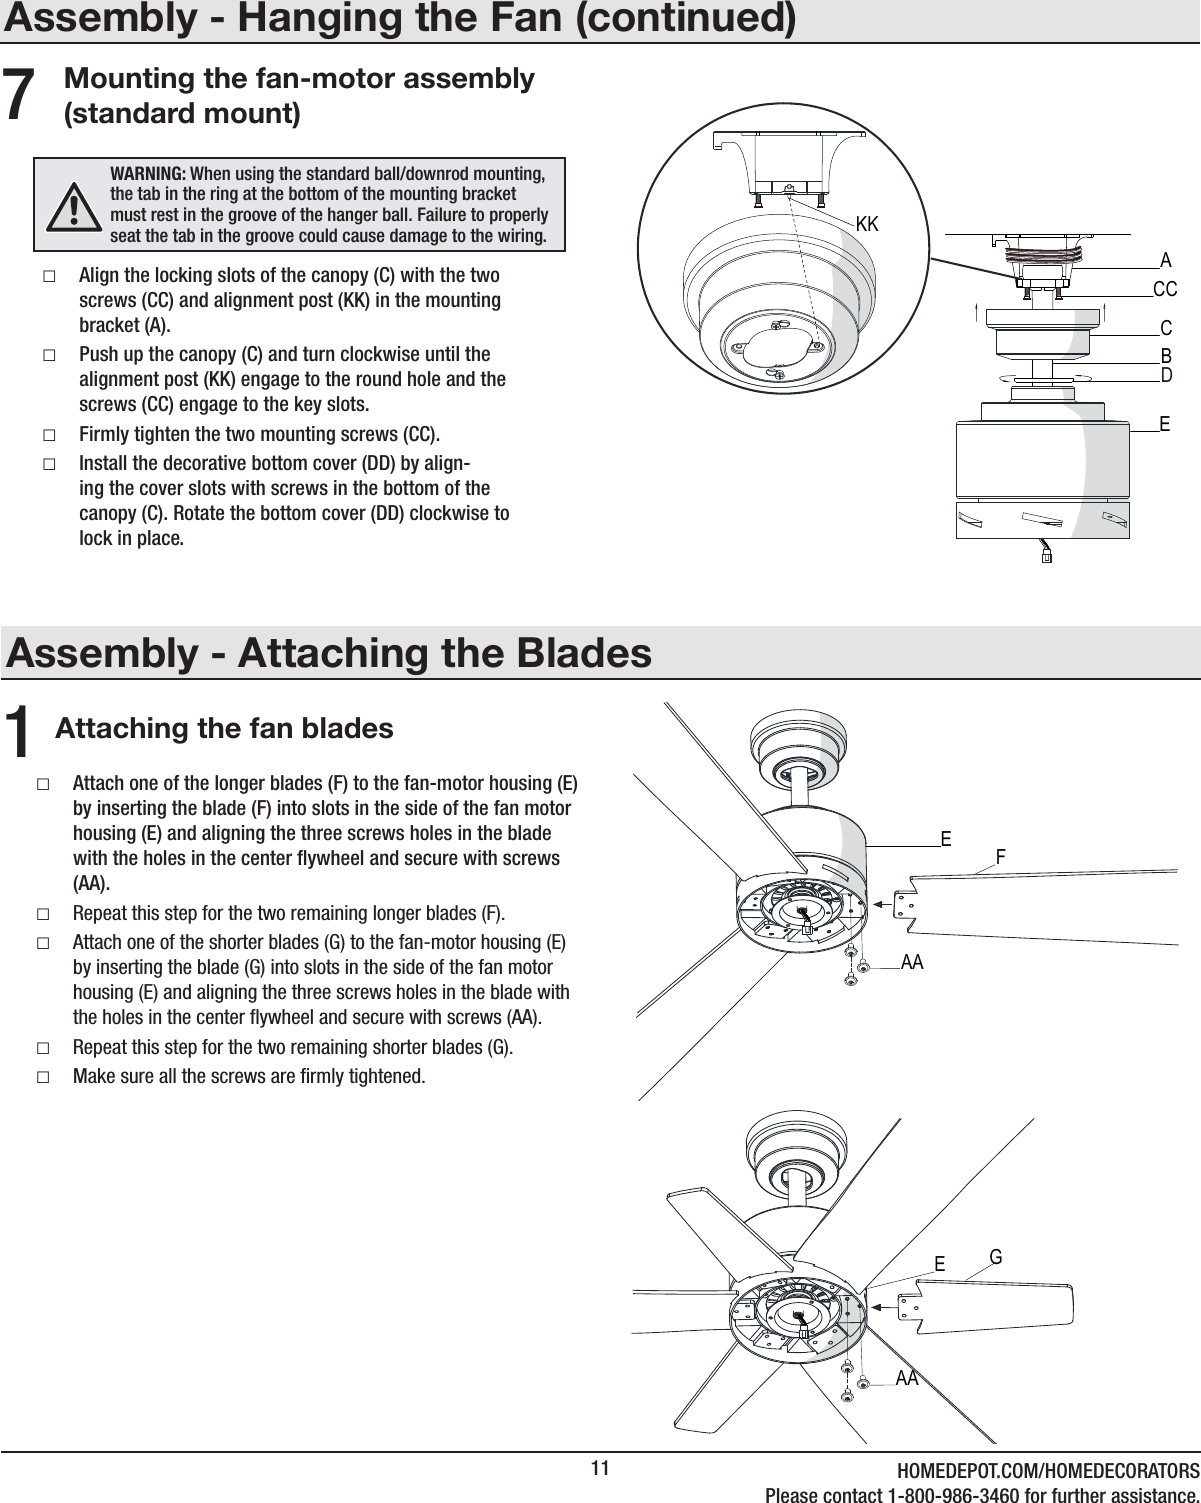 11 HOMEDEPOT.COM/HOMEDECORATORSPlease contact 1-800-986-3460 for further assistance.Assembly - Attaching the BladesAttaching the fan blades1 □Attach one of the longer blades (F) to the fan-motor housing (E) by inserting the blade (F) into slots in the side of the fan motor housing (E) and aligning the three screws holes in the blade with the holes in the center ywheel and secure with screws (AA). □Repeat this step for the two remaining longer blades (F). □Attach one of the shorter blades (G) to the fan-motor housing (E) by inserting the blade (G) into slots in the side of the fan motor housing (E) and aligning the three screws holes in the blade with the holes in the center ﬂywheel and secure with screws (AA). □Repeat this step for the two remaining shorter blades (G). □Make sure all the screws are ﬁrmly tightened.Assembly - Hanging the Fan (continued)Mounting the fan-motor assembly (standard mount) □Align the locking slots of the canopy (C) with the two screws (CC) and alignment post (KK) in the mounting bracket (A). □Push up the canopy (C) and turn clockwise until the alignment post (KK) engage to the round hole and the screws (CC) engage to the key slots. □Firmly tighten the two mounting screws (CC). □Install the decorative bottom cover (DD) by align-ing the cover slots with screws in the bottom of the canopy (C). Rotate the bottom cover (DD) clockwise to lock in place.7WARNING: When using the standard ball/downrod mounting, the tab in the ring at the bottom of the mounting bracket must rest in the groove of the hanger ball. Failure to properly seat the tab in the groove could cause damage to the wiring.CACCDBEKKFEAAGEAA